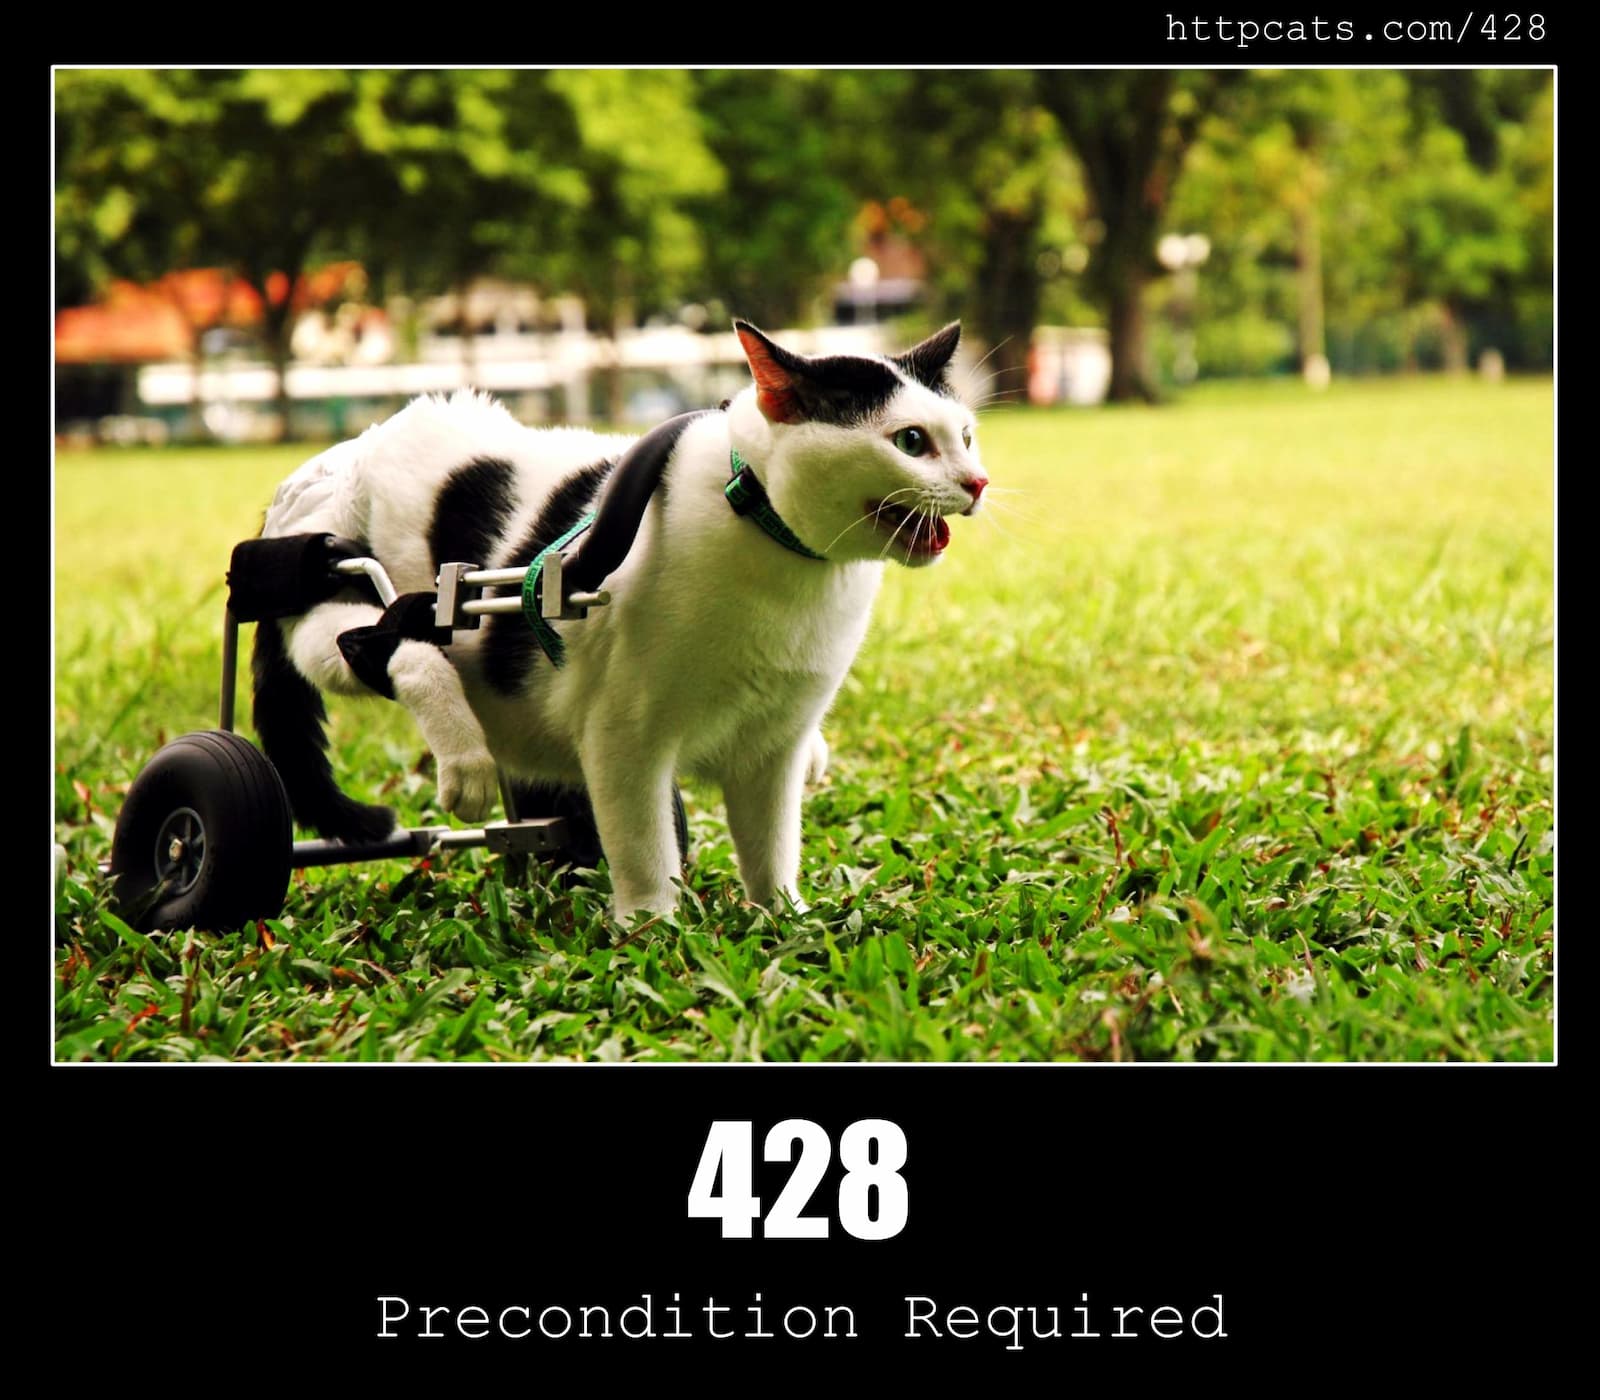 HTTP Status Code 428 Precondition Required & Cats